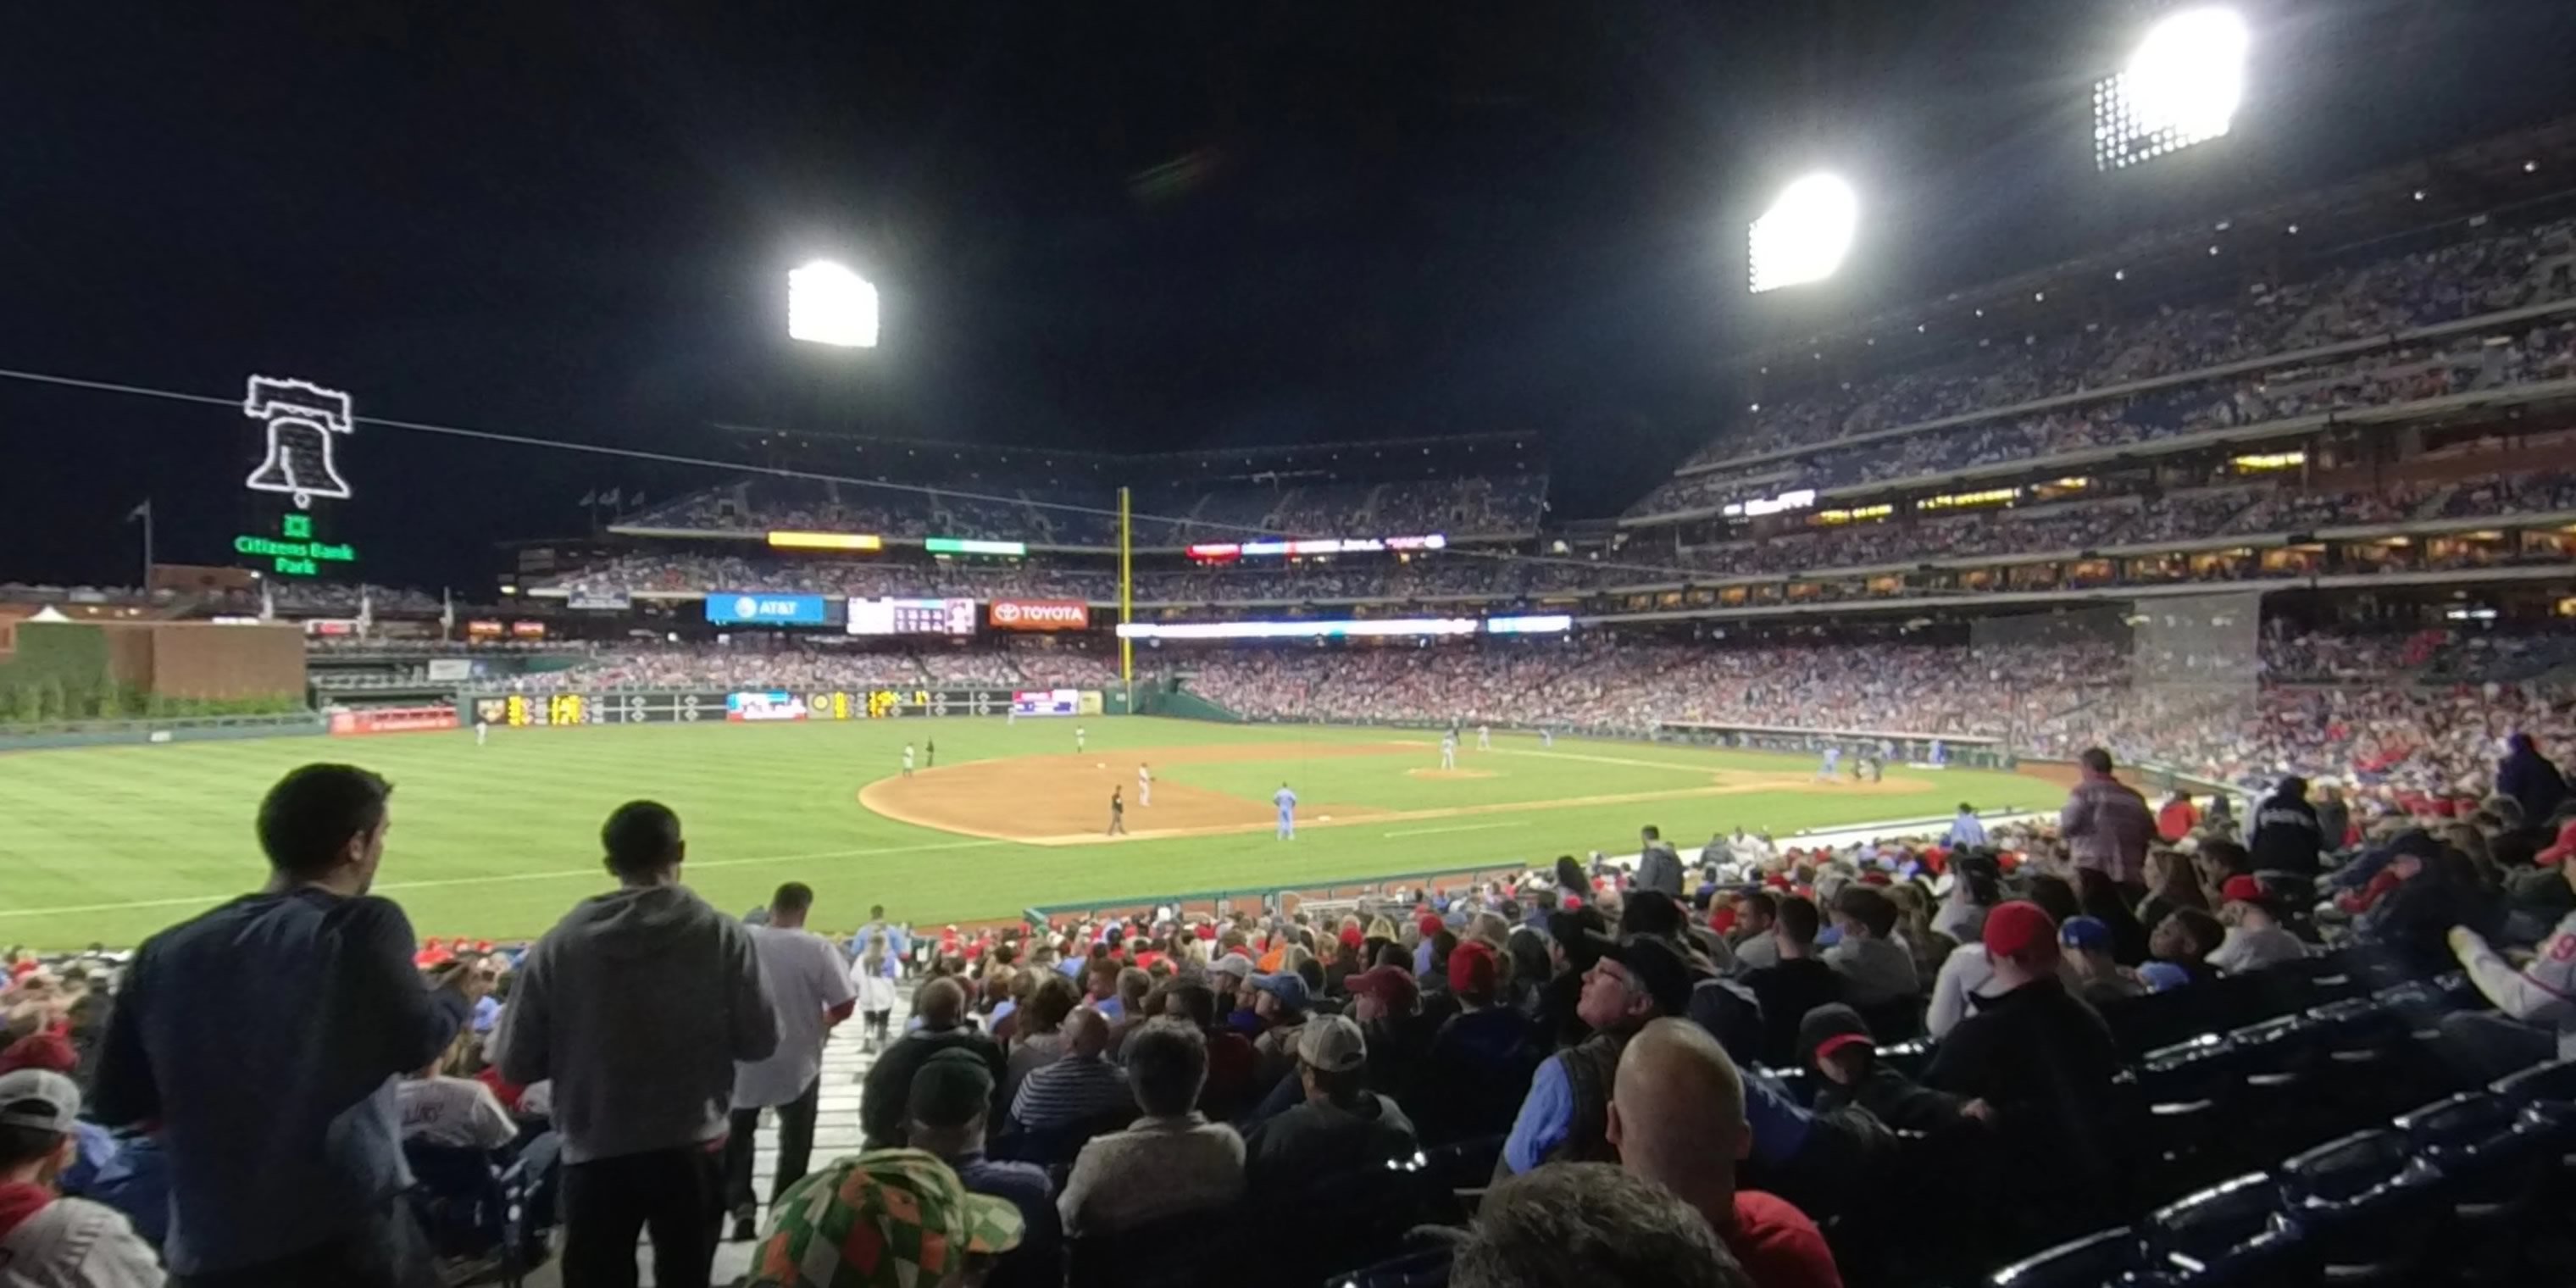 section 133 panoramic seat view  for baseball - citizens bank park